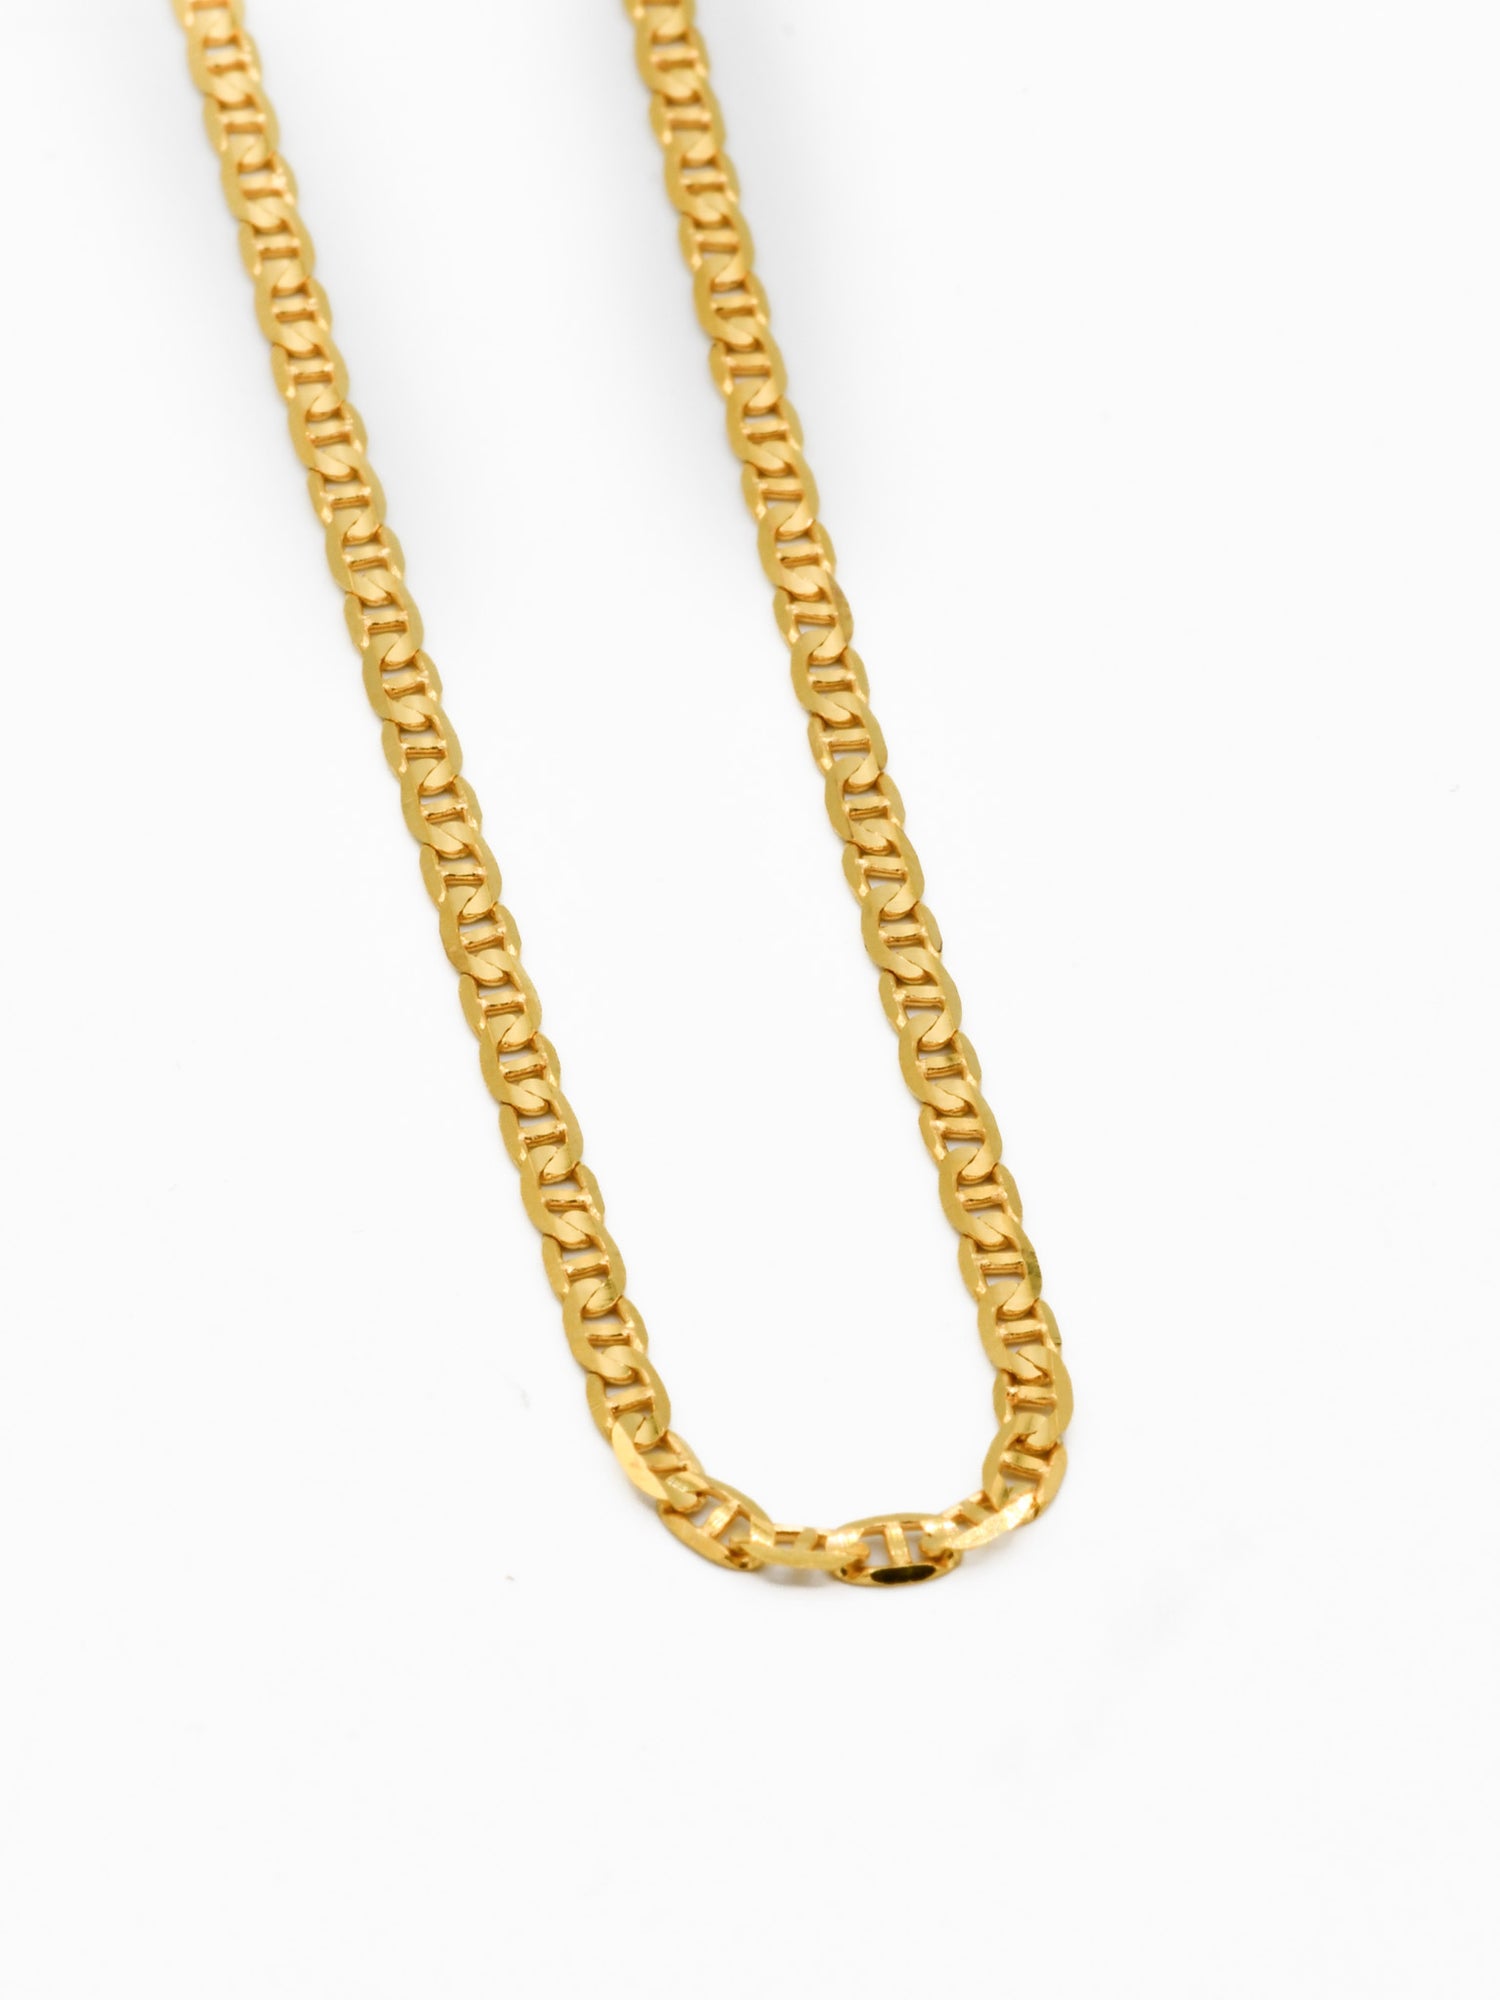 22ct Gold Chain - Roop Darshan